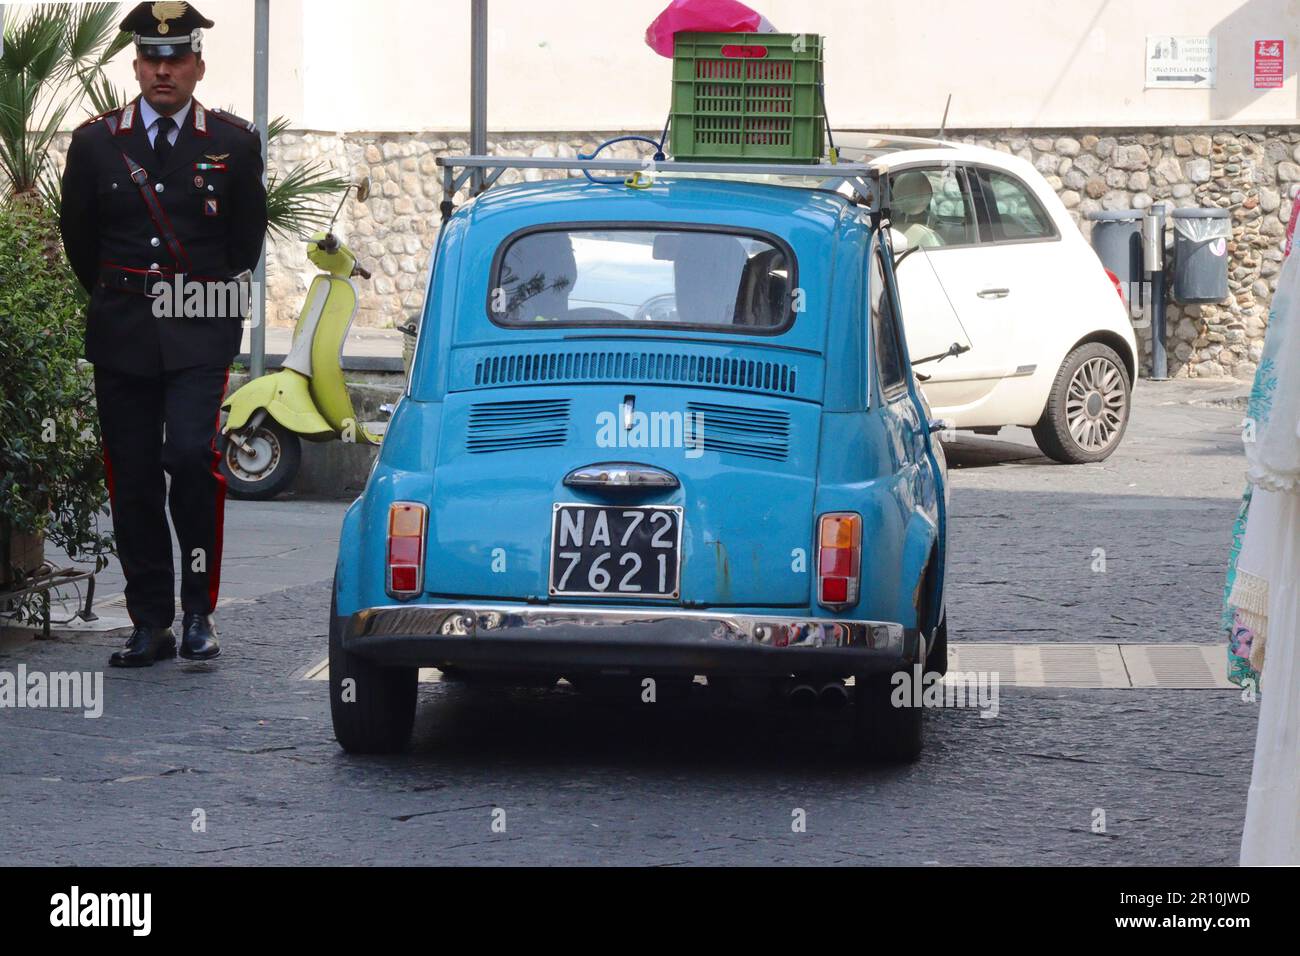 An original Fiat 500 Cinquecento has right of way at traffic controlled lights, to a current modern Fiat 500 3 door hatchback in Amalfi, Italy. Stock Photo